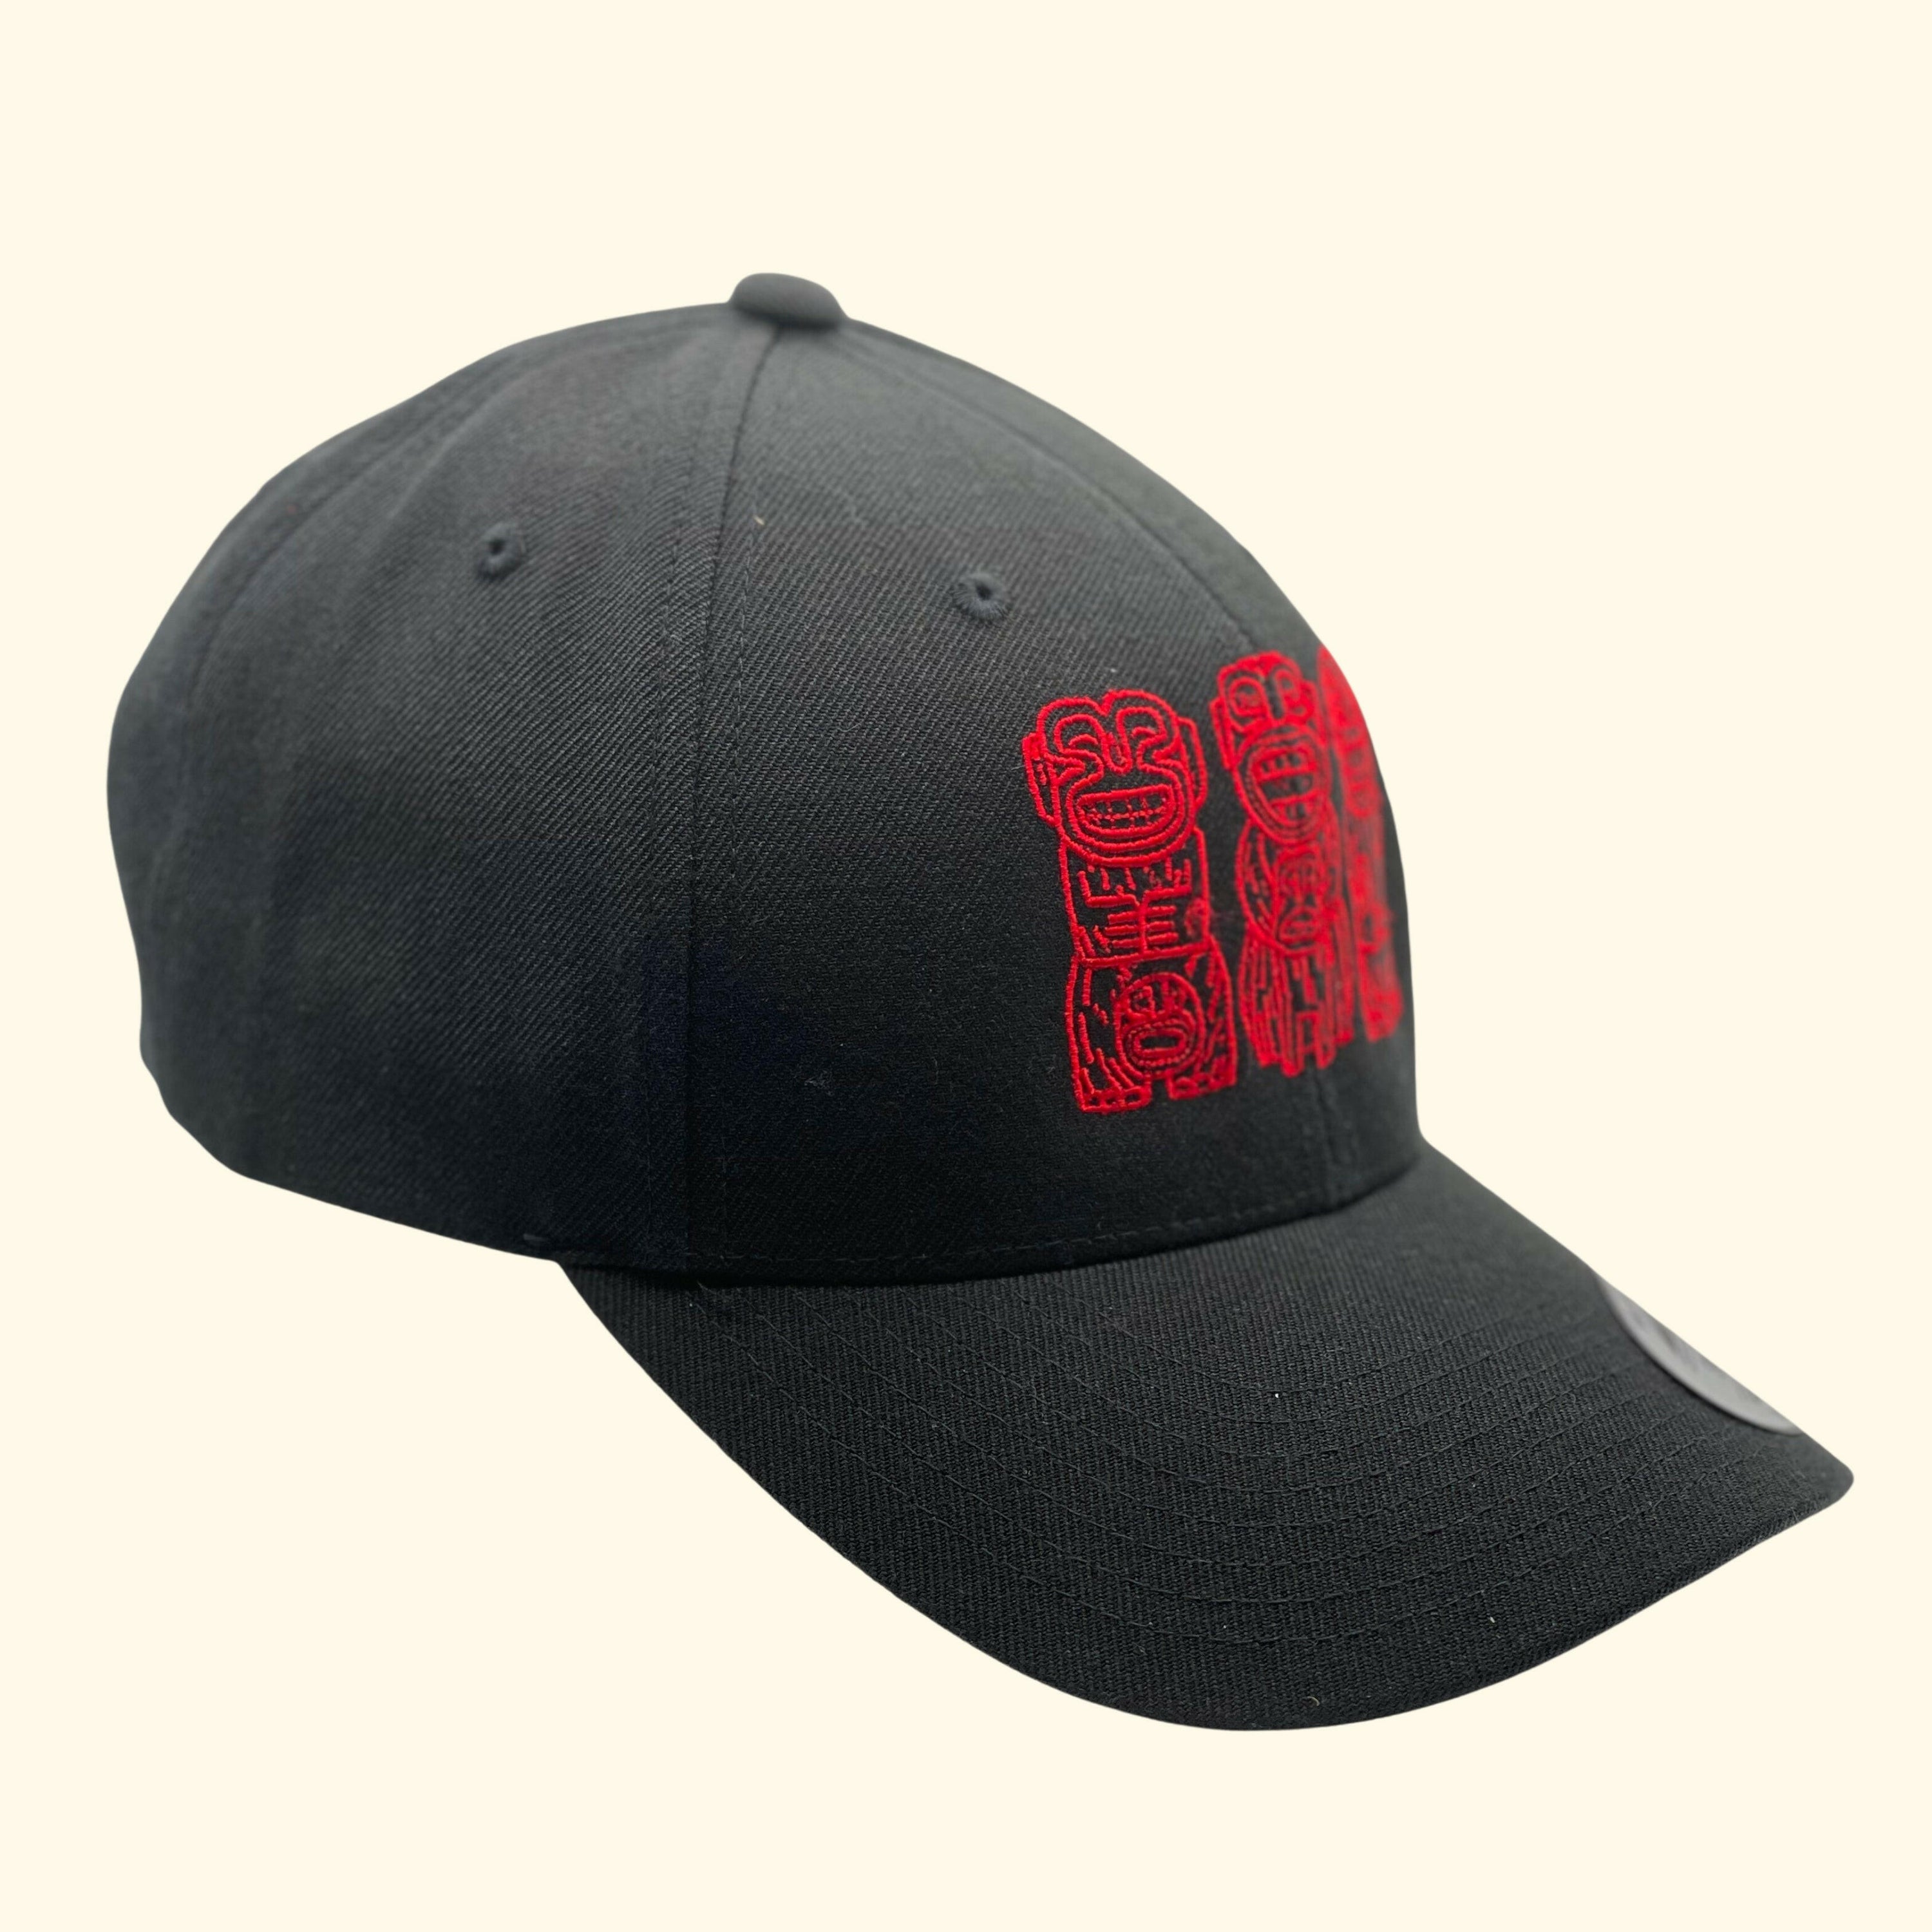 Here Come the Cannibals Premium Curved Bill Black Snapback Cap